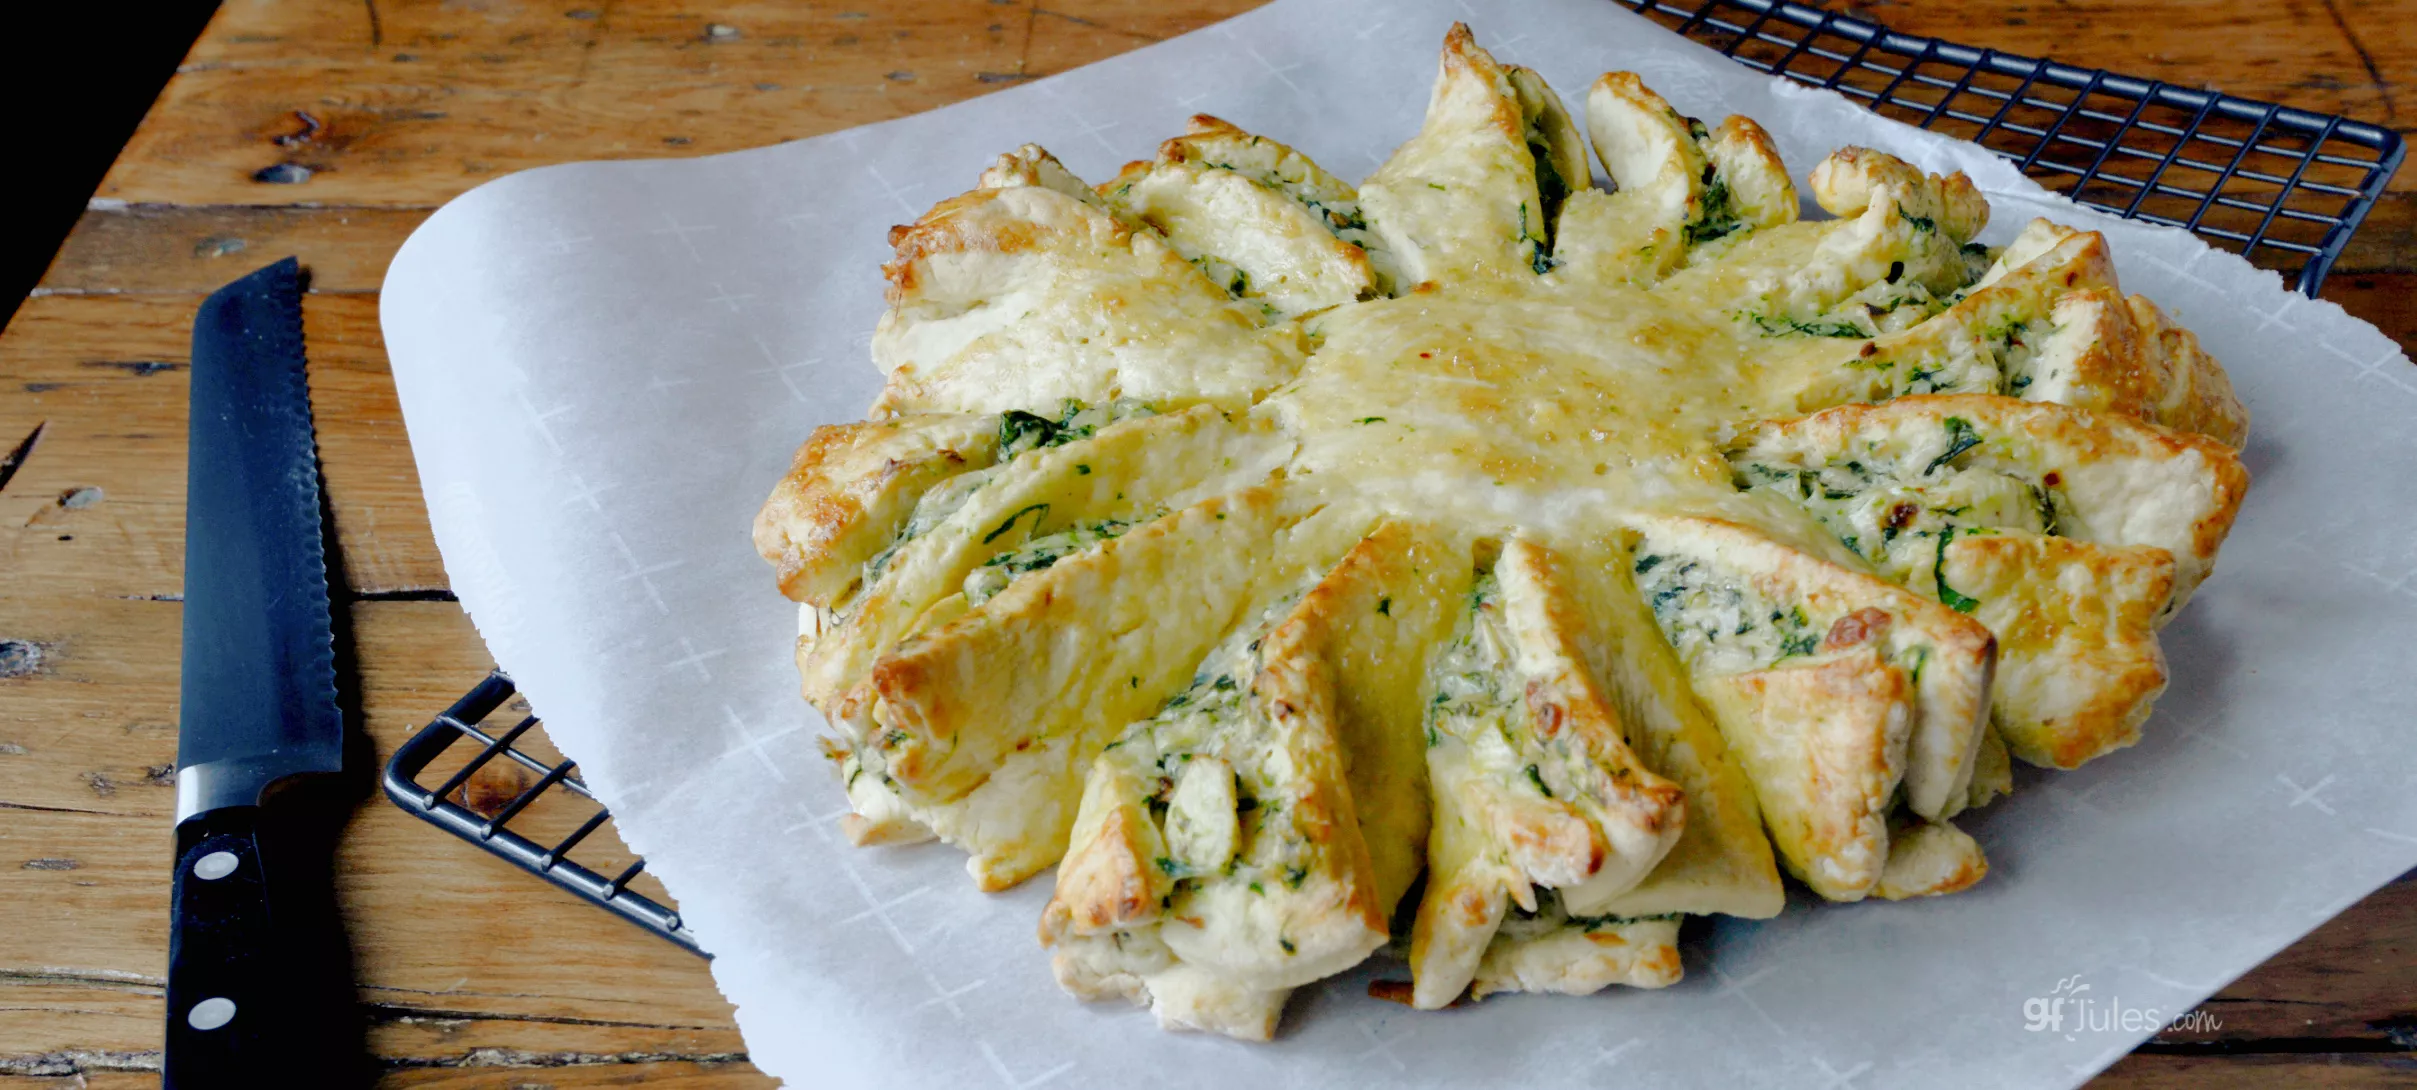 Gluten Free Spinach Artichoke Pull Apart Bread with Knife (1)